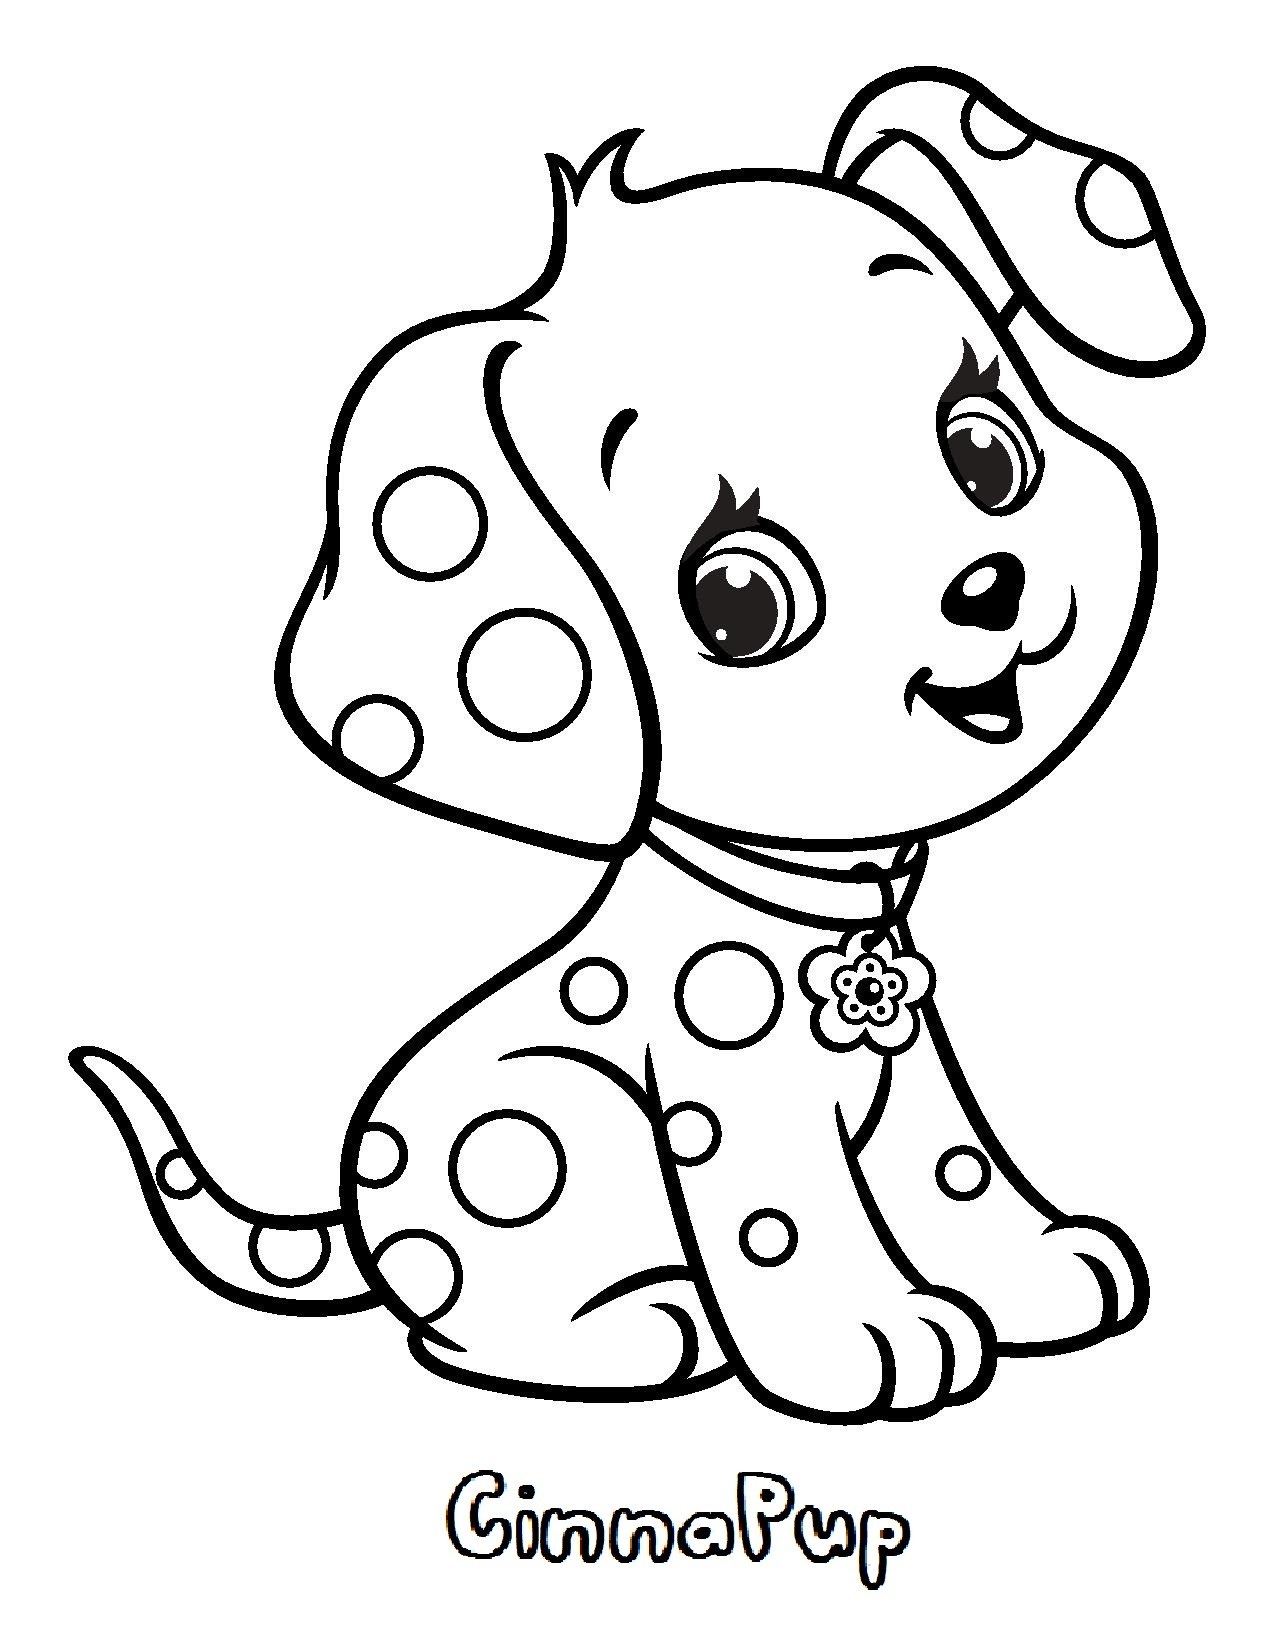 Cinna Puppy Coloring Page - Free Printable Coloring Pages ...